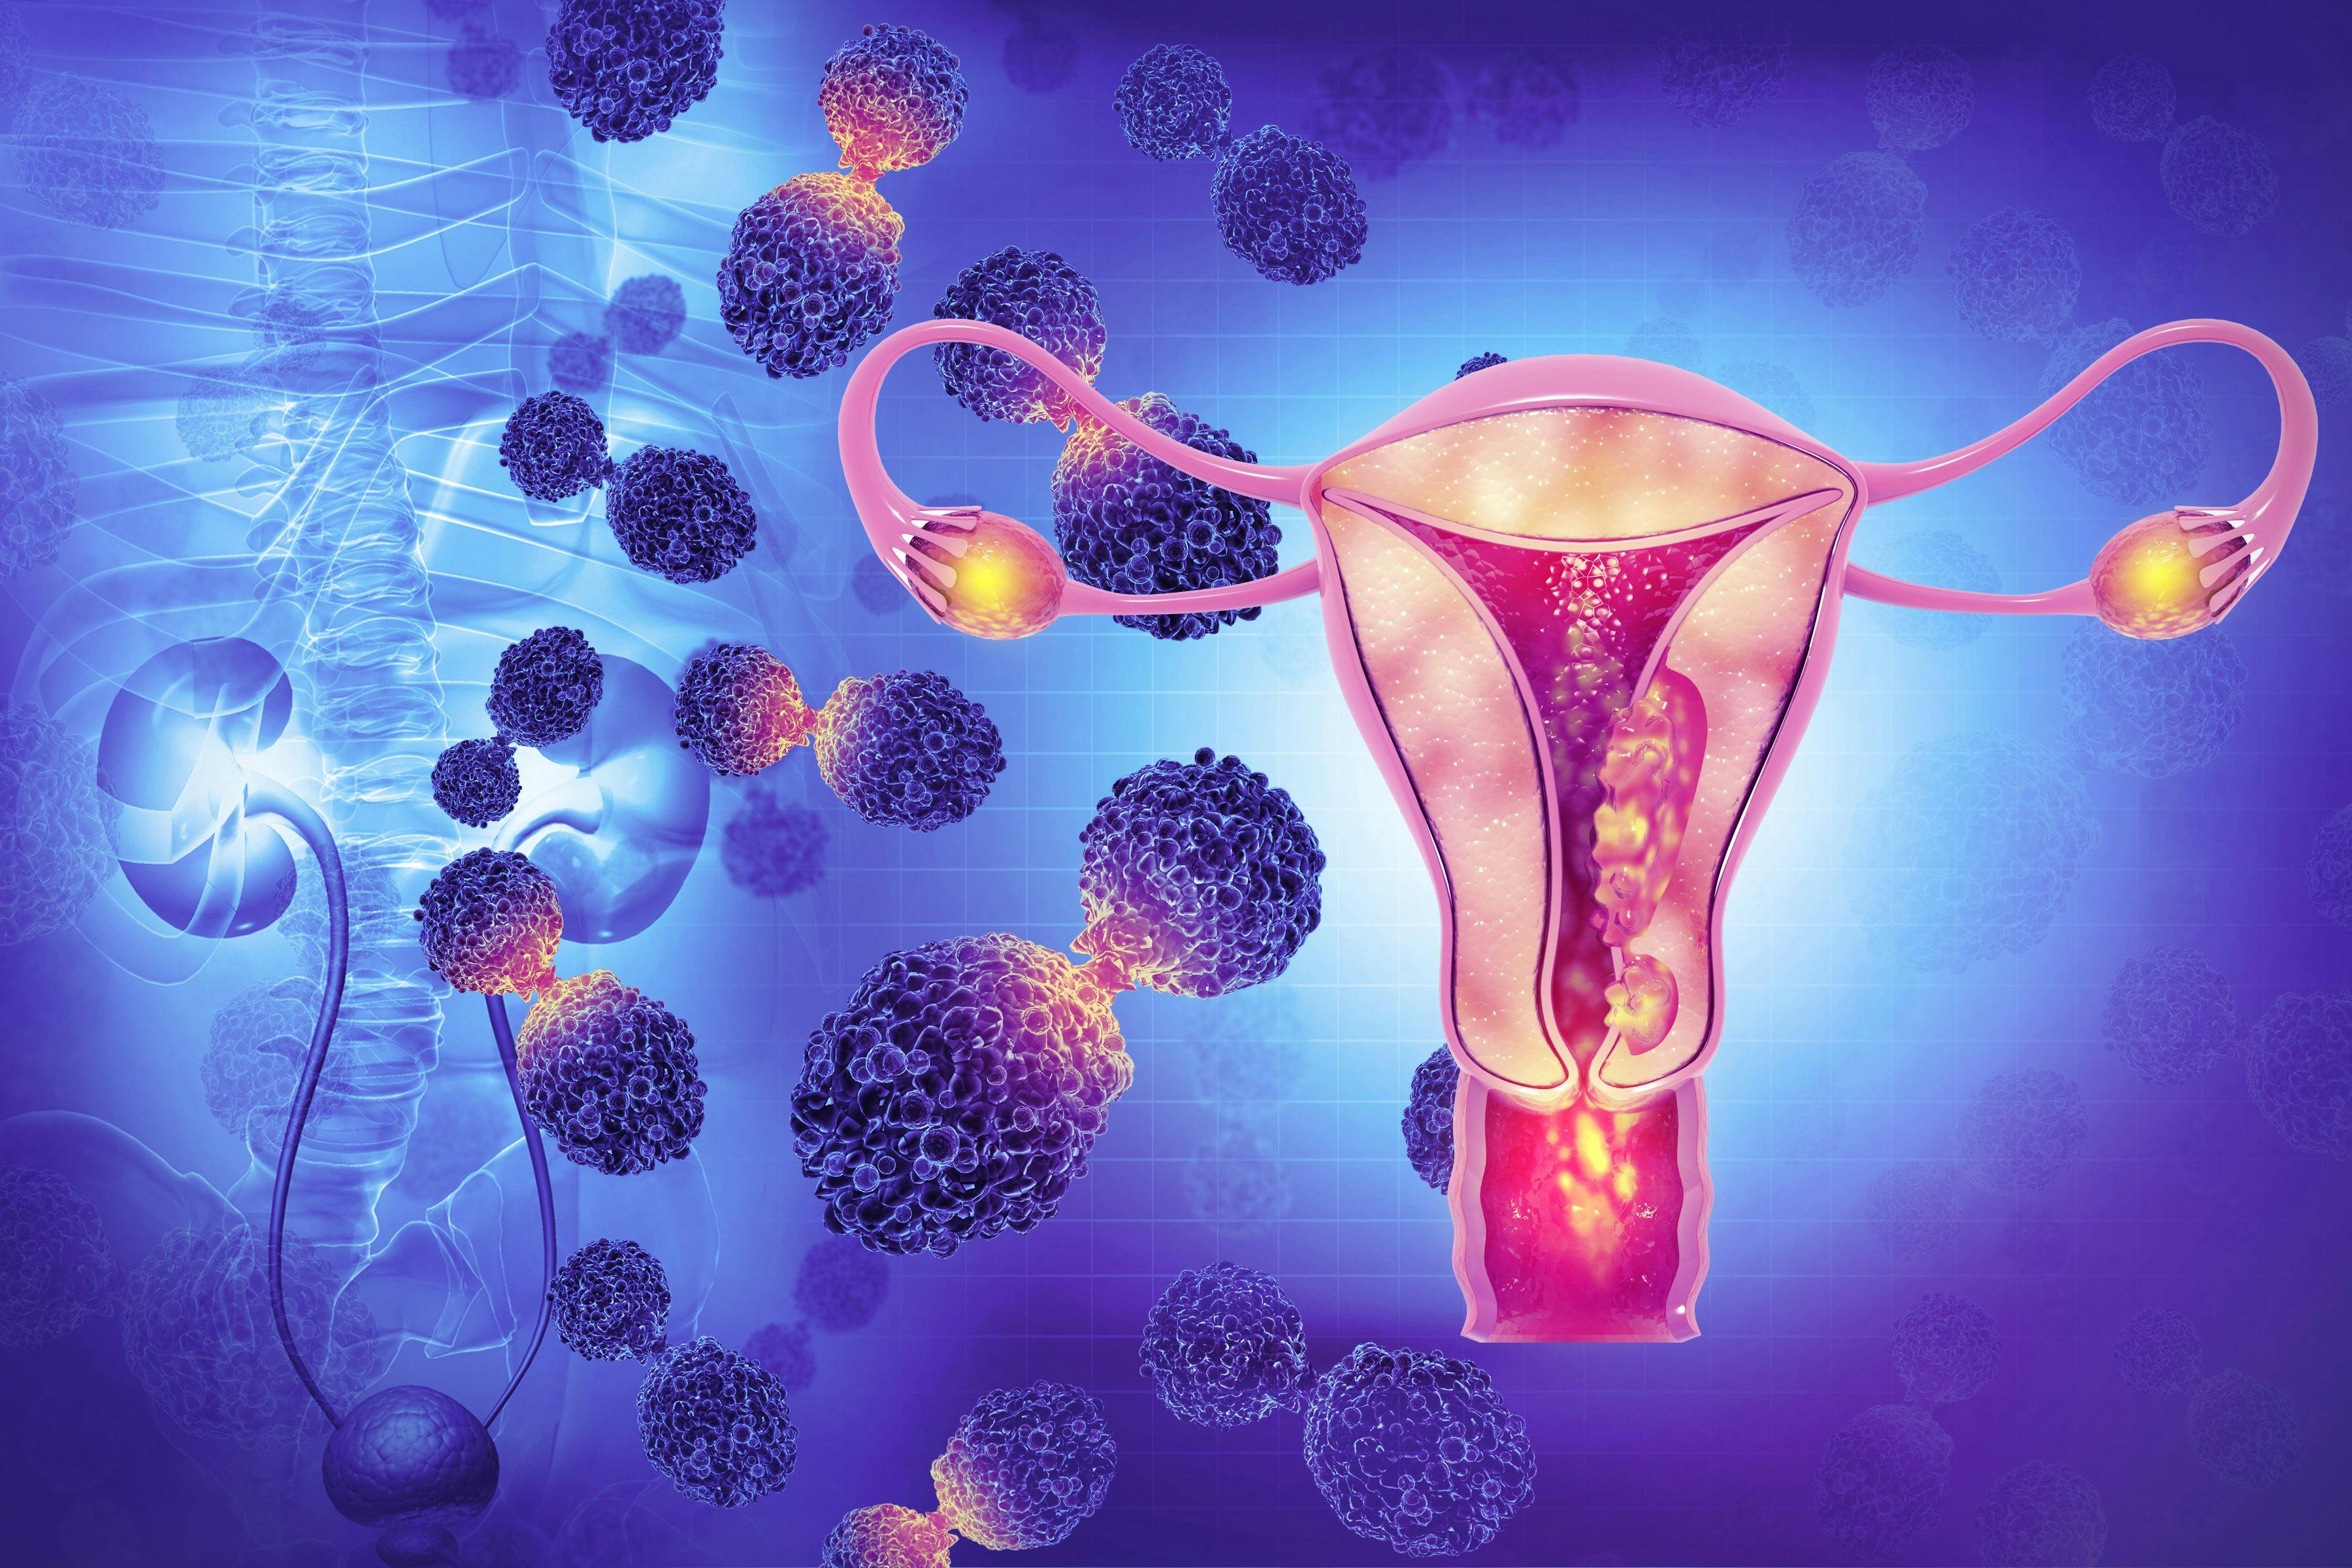 Ovarian cancer image of ovarian with cancer cells | Image credit: Crystal light - stock.adobe.com